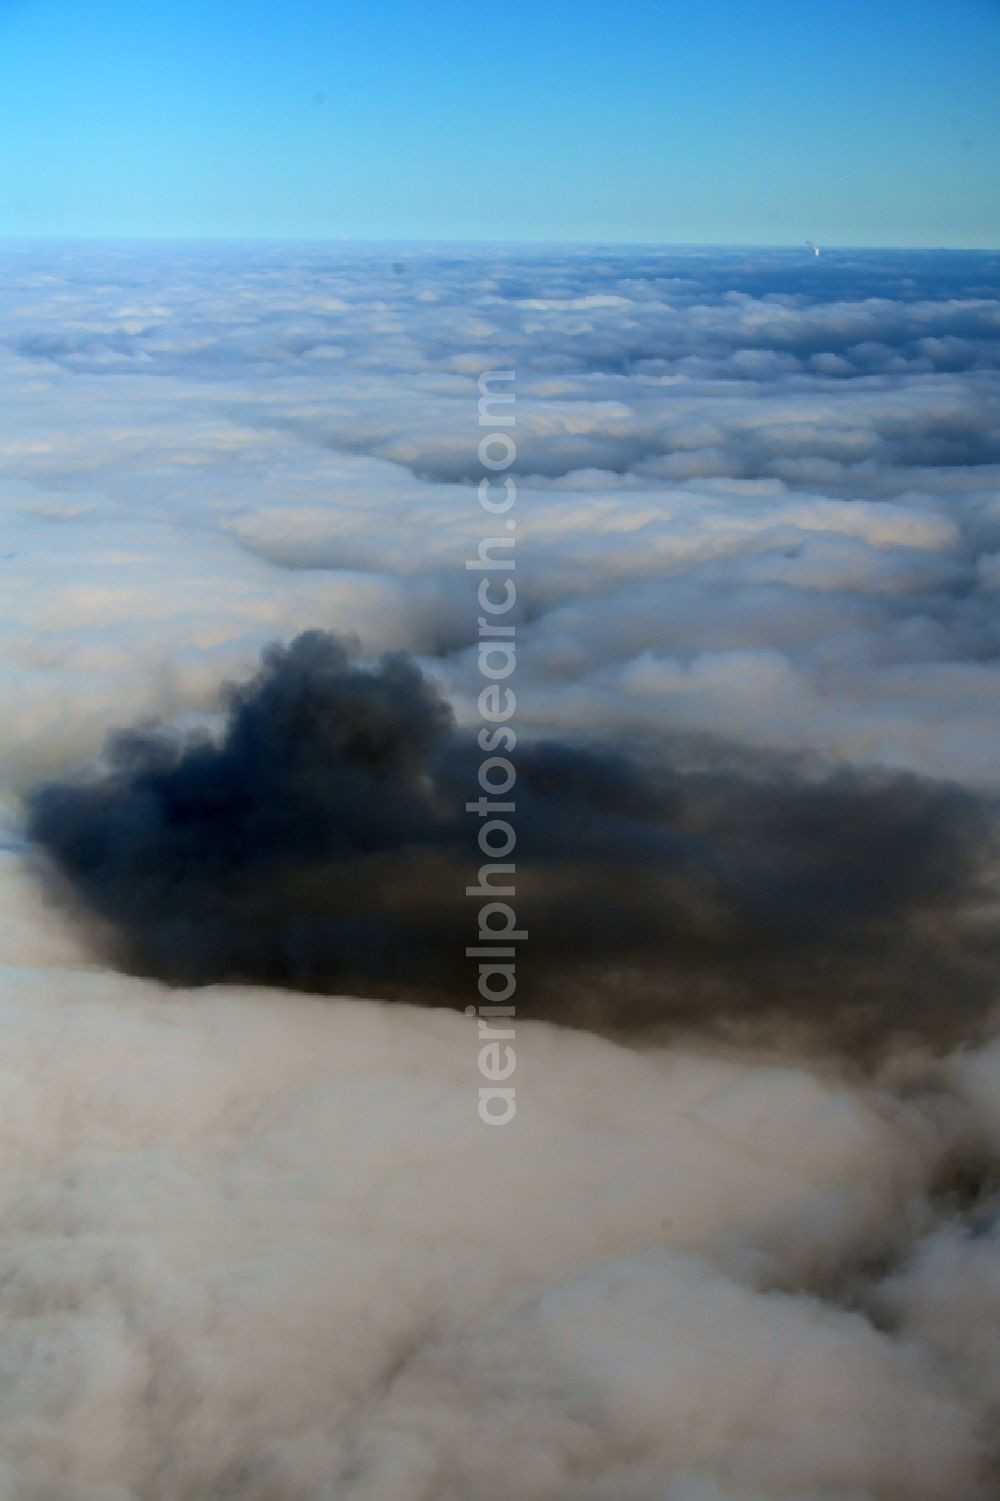 Aerial image Riesa - Weather situation with cloud formation and black combustion residues in a closed covering layer of high fog over Riesa in the state Saxony, Germany